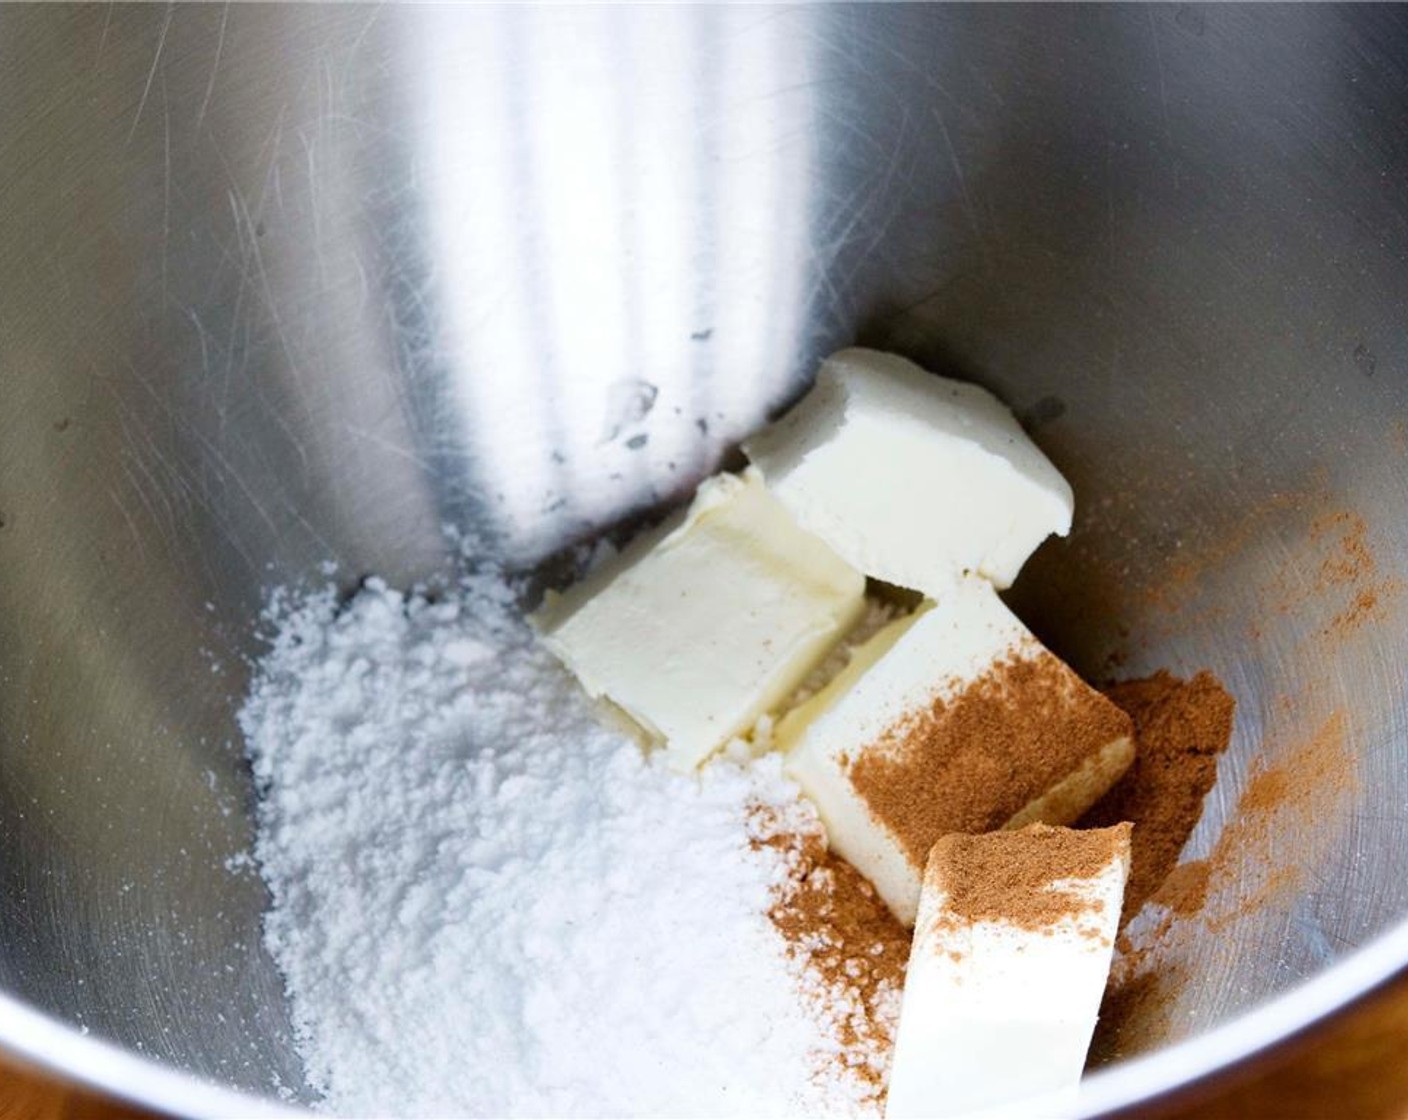 step 6 Prepare the icing by mixing the Powdered Confectioners Sugar (1 cup), Philadelphia Original Soft Cheese (1/2 cup), and Ground Cinnamon (1/2 tsp) together with a handheld mixer over medium speed.